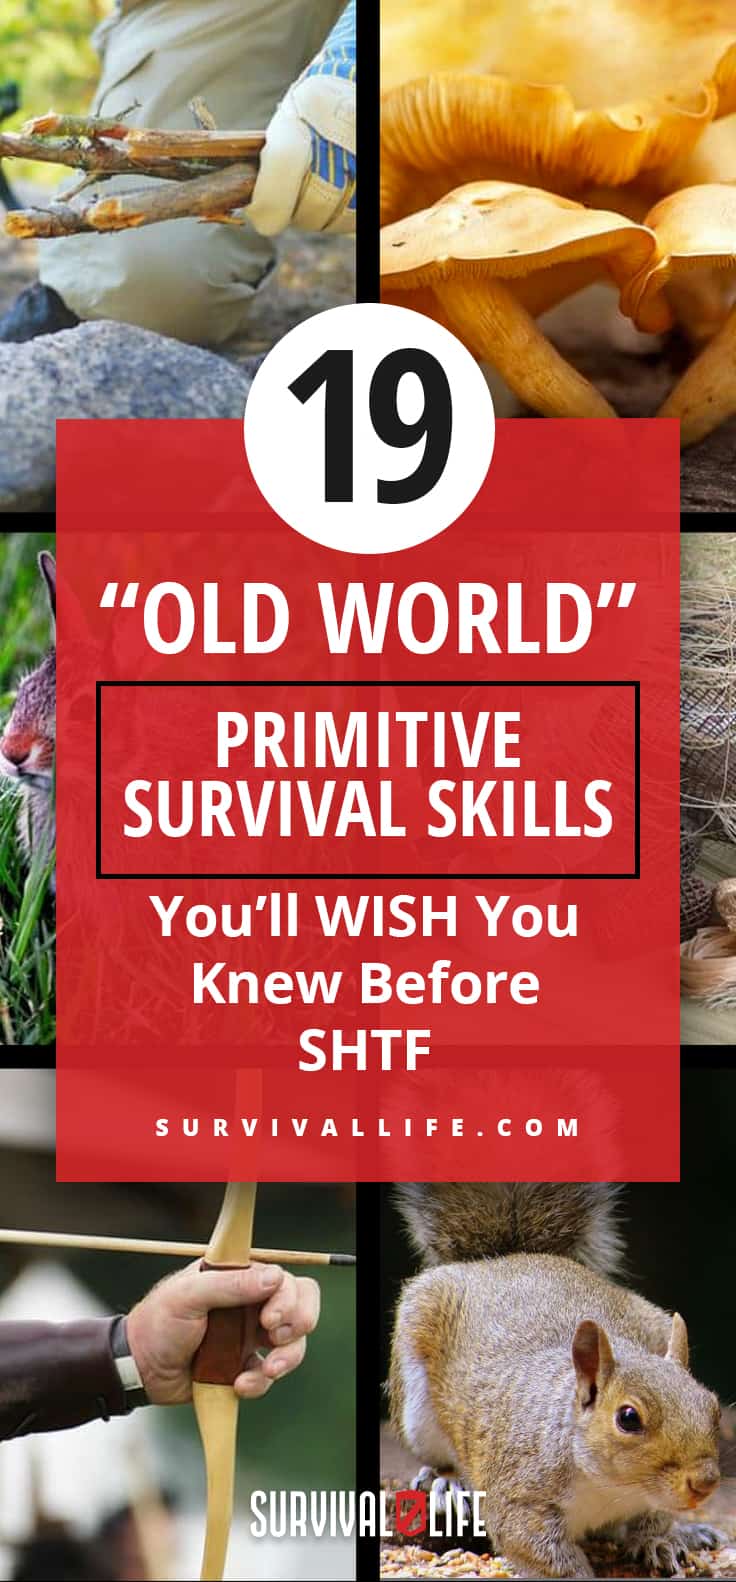 Placard | Survival Skills | "Old World" Primitive Survival Skills You'll WISH You Knew Before SHTF